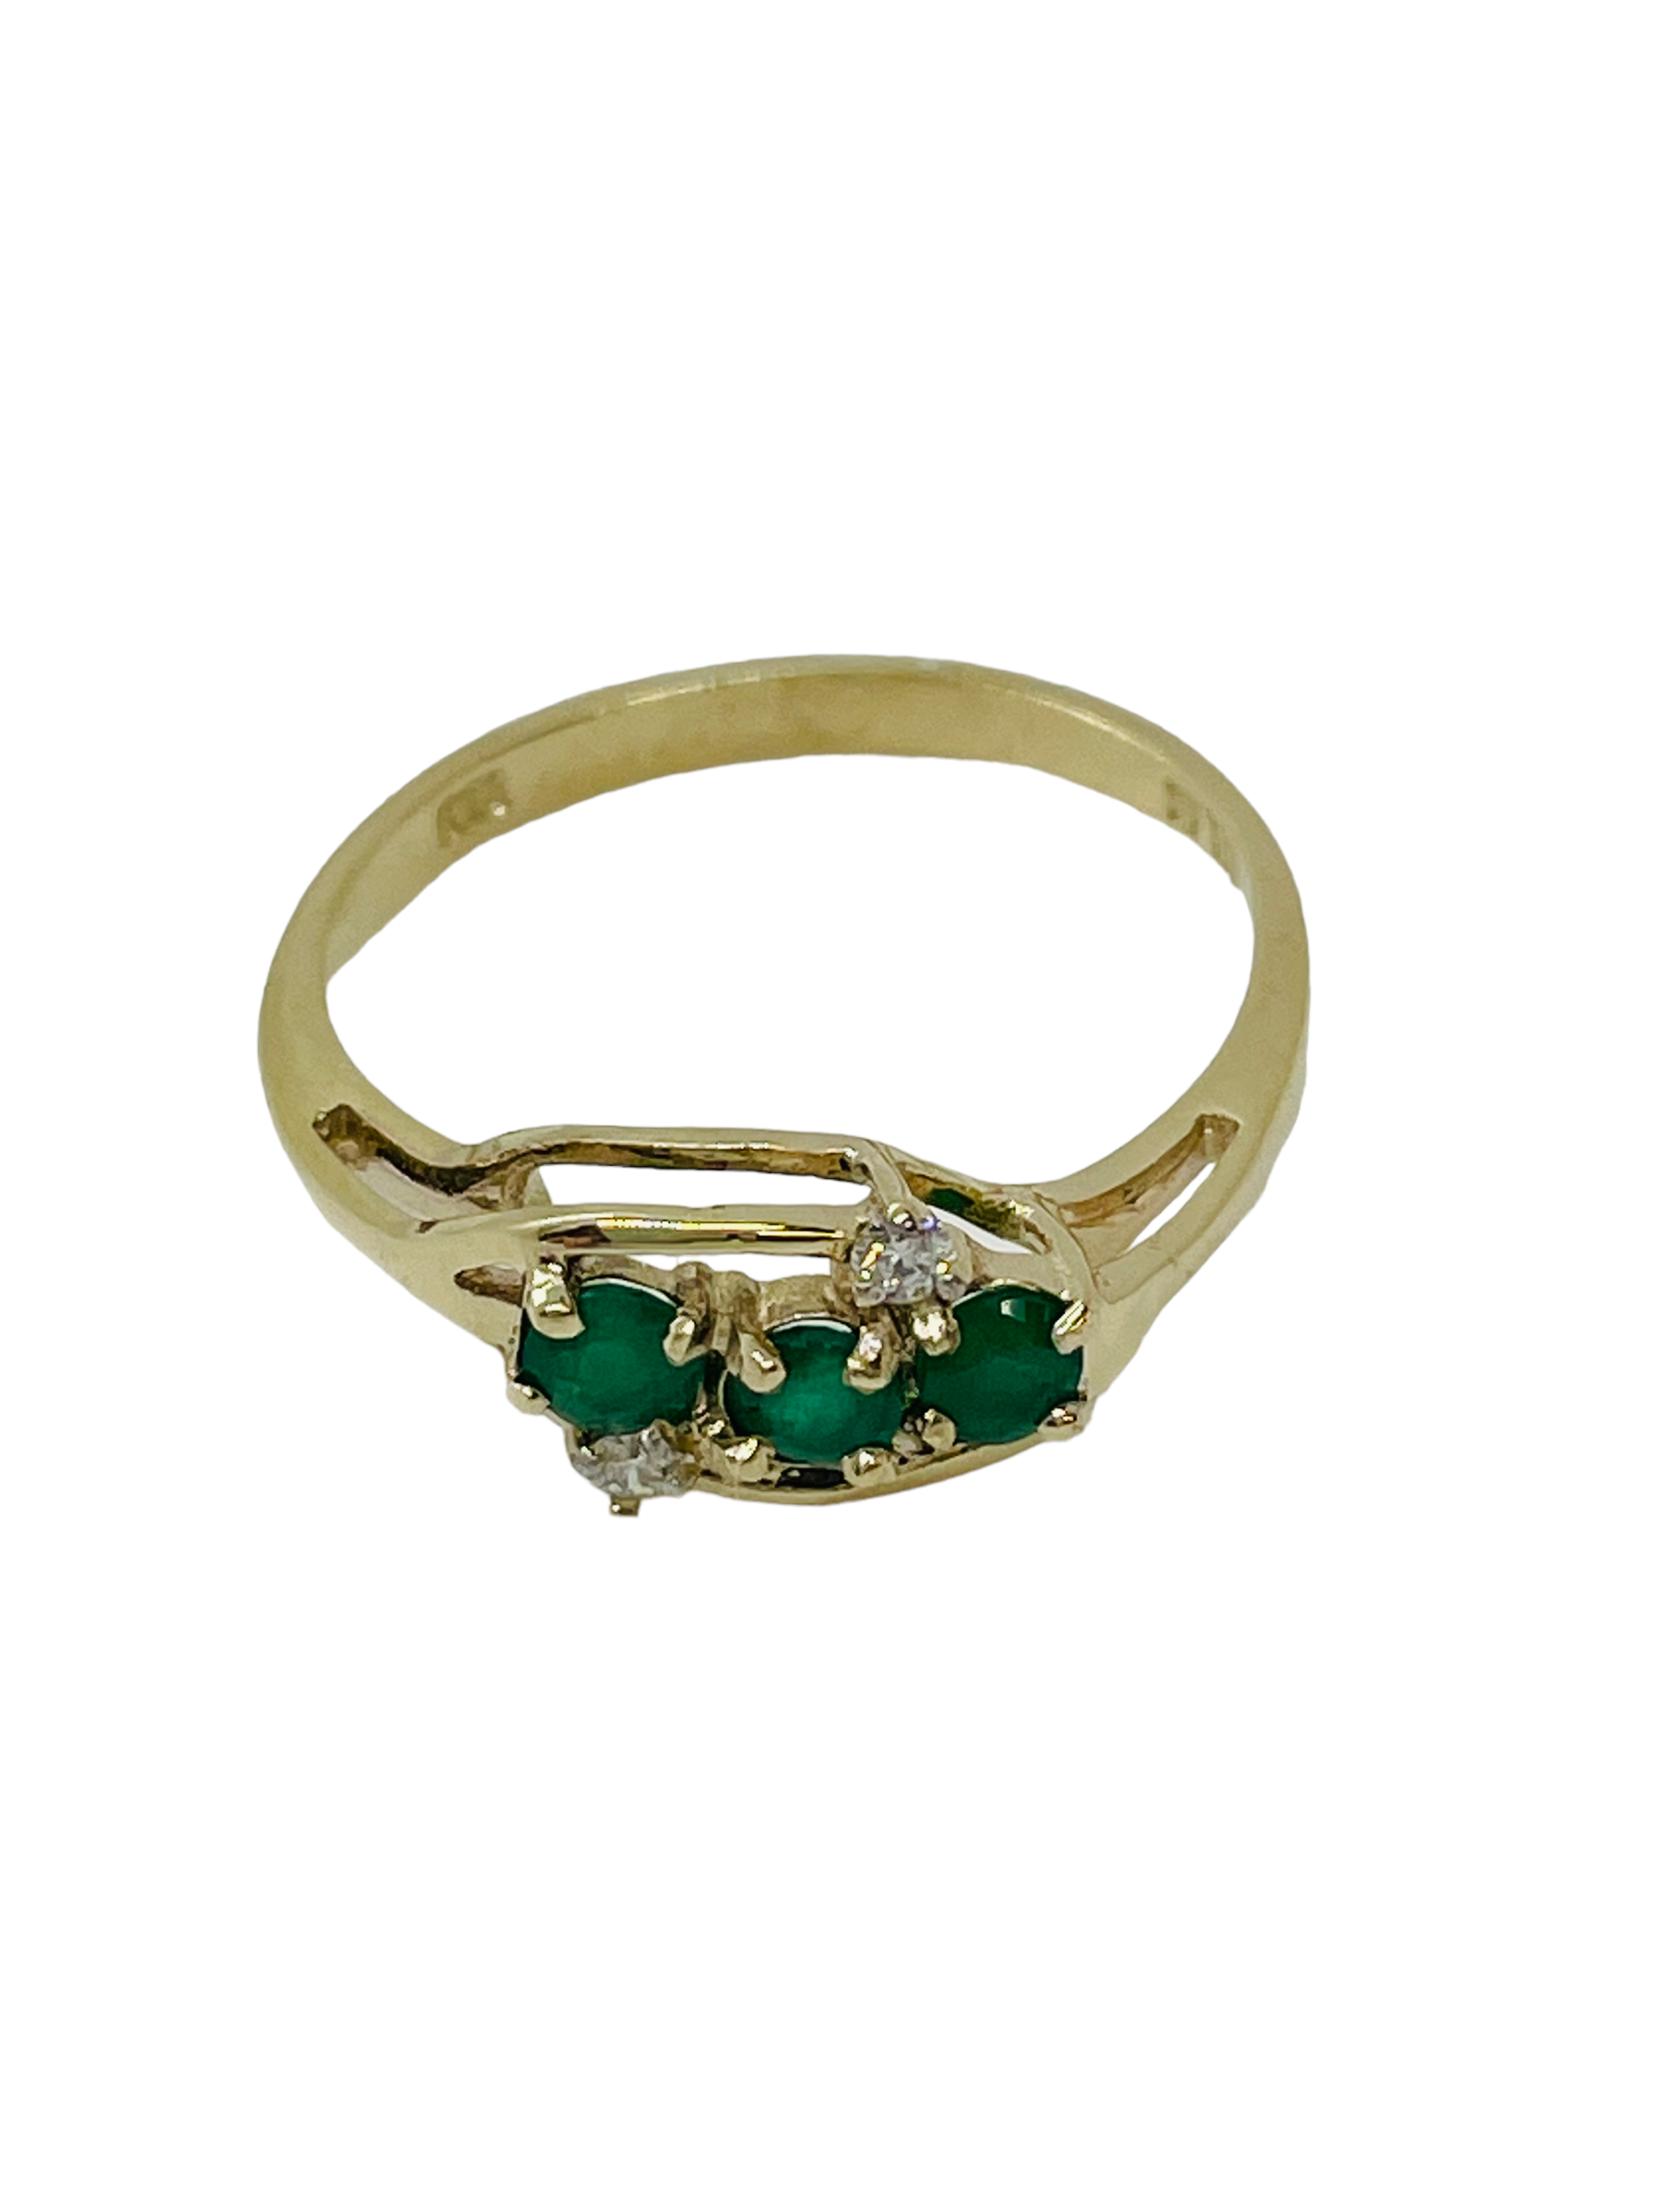 9ct Yellow Gold Ring with 3 Emeralds and 2 Diamonds